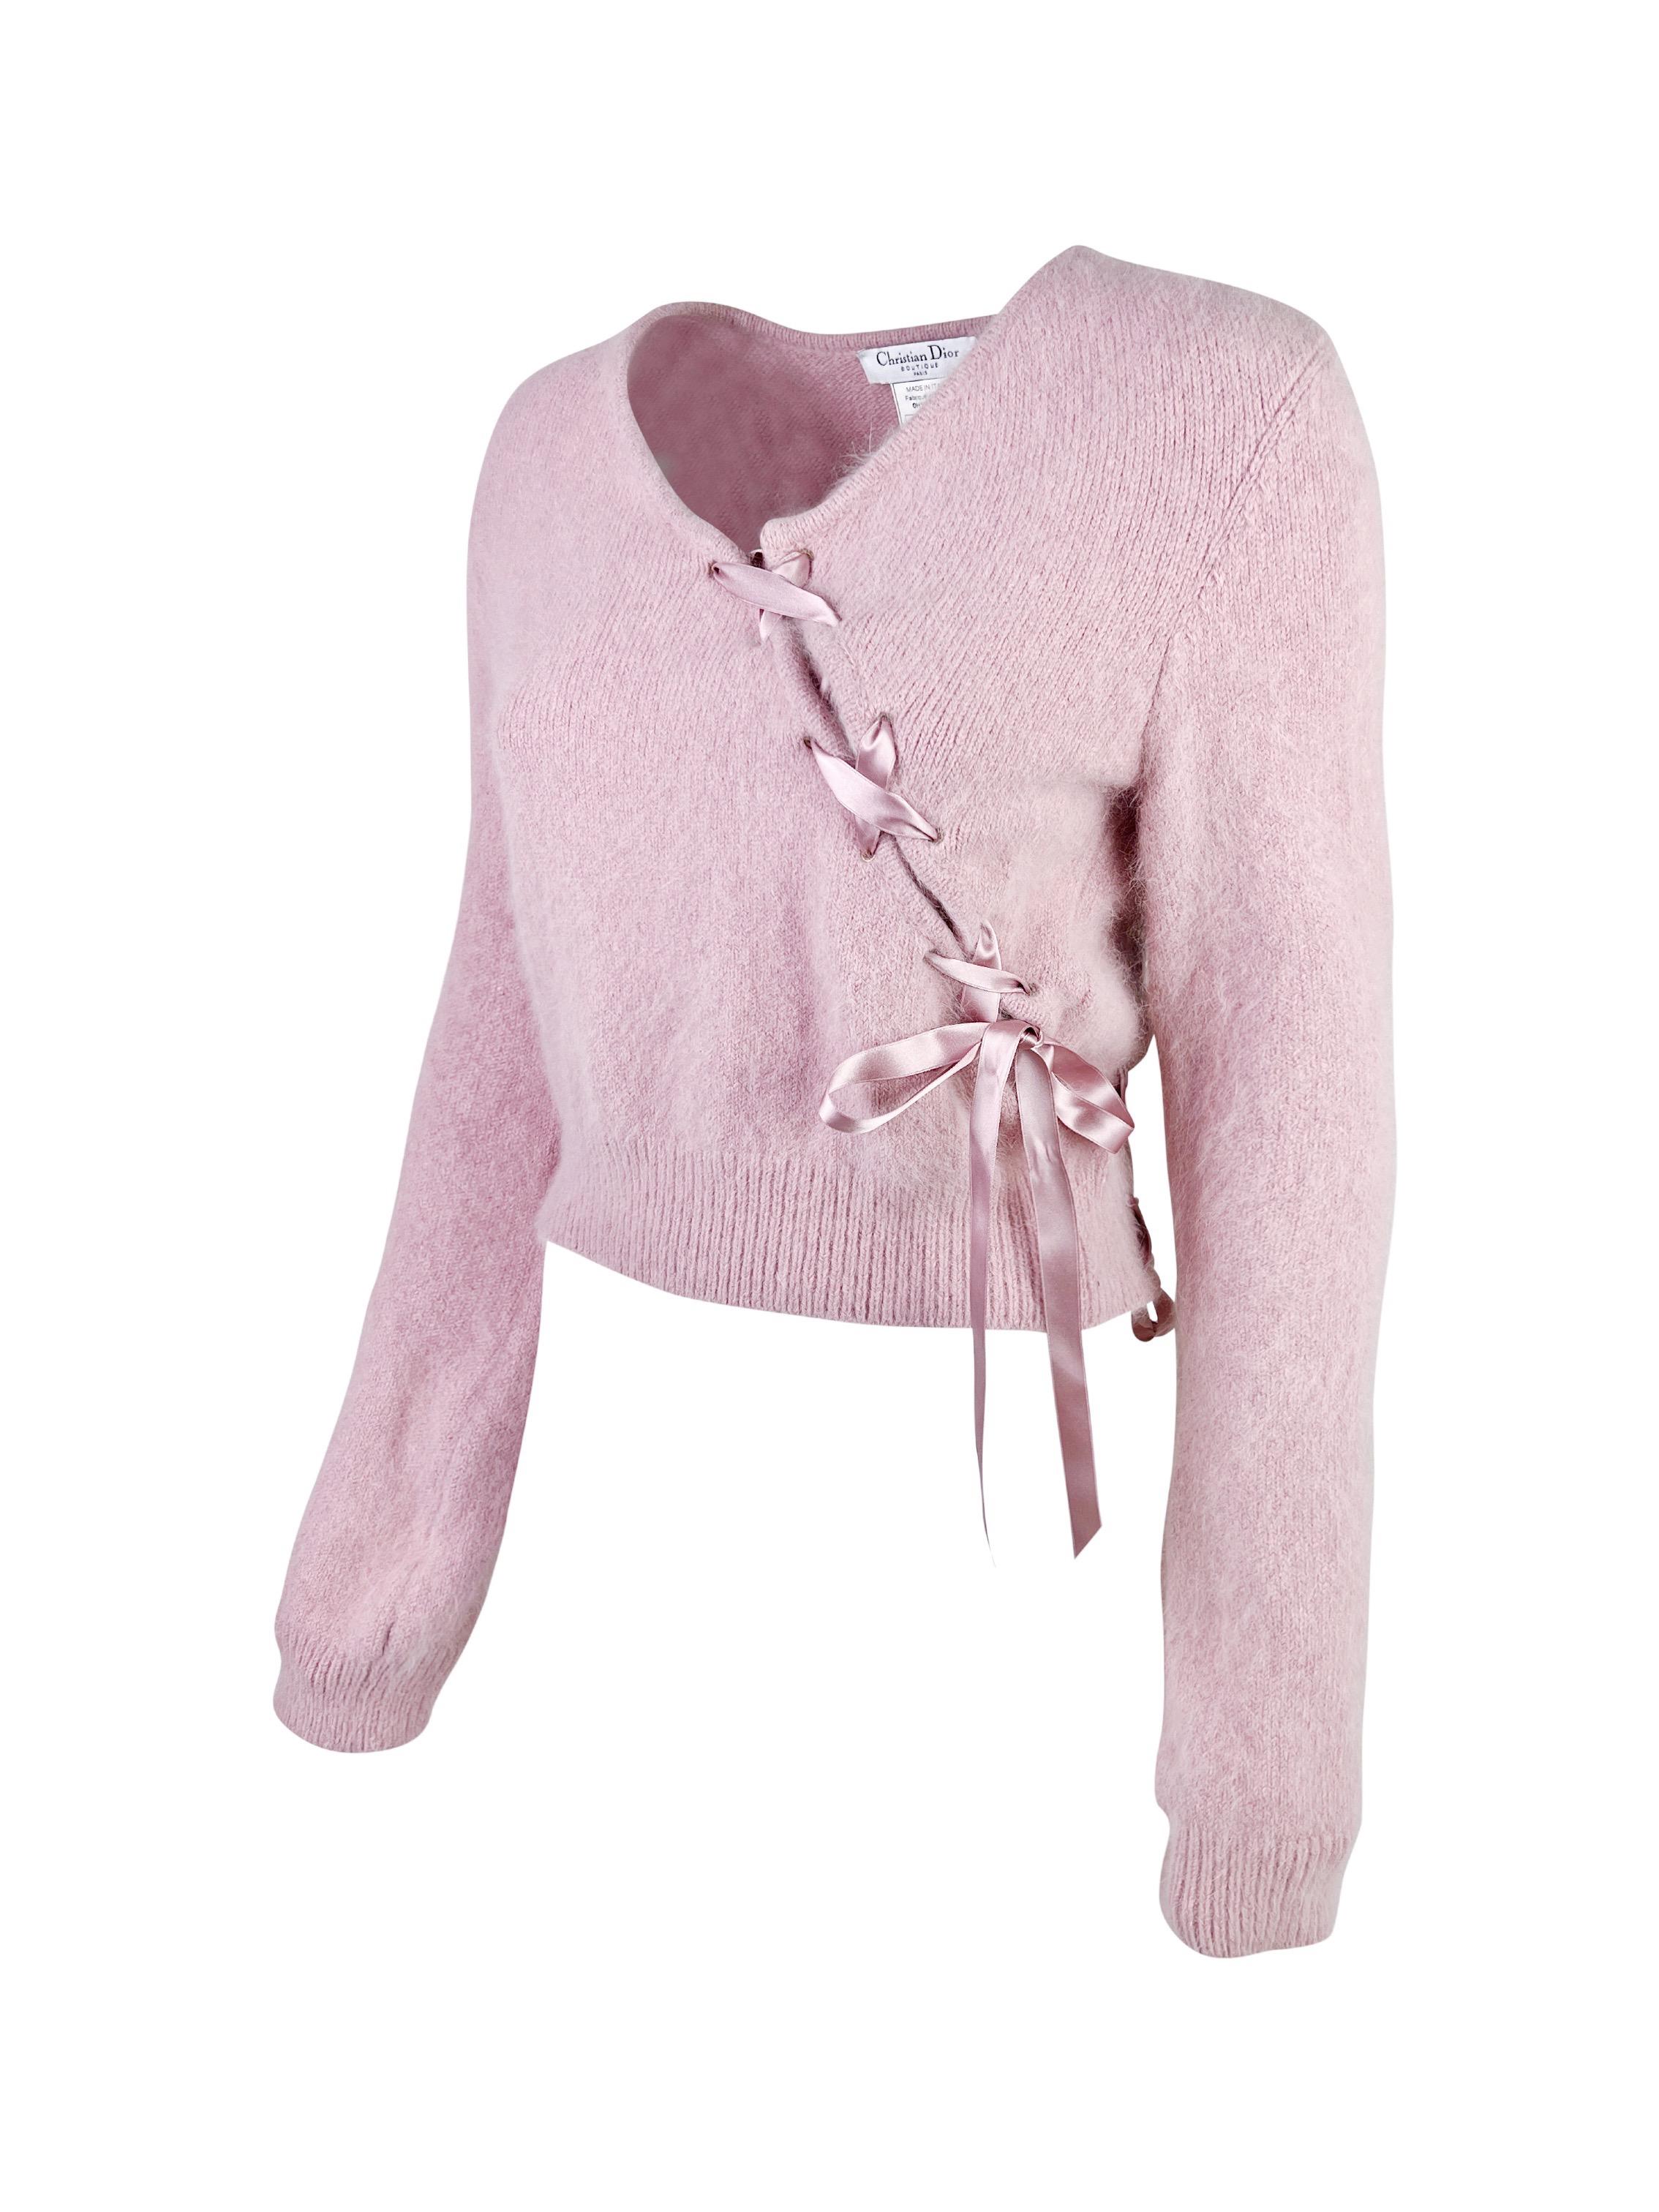 A beautiful and very fluffy angora sweater with stunning lace up details in the front and in the back decorated with silk ribbons.

Dirty rose/blush color (closer to the close-up photo of the label).

Size FR 38,  fits like Small, but can be styled